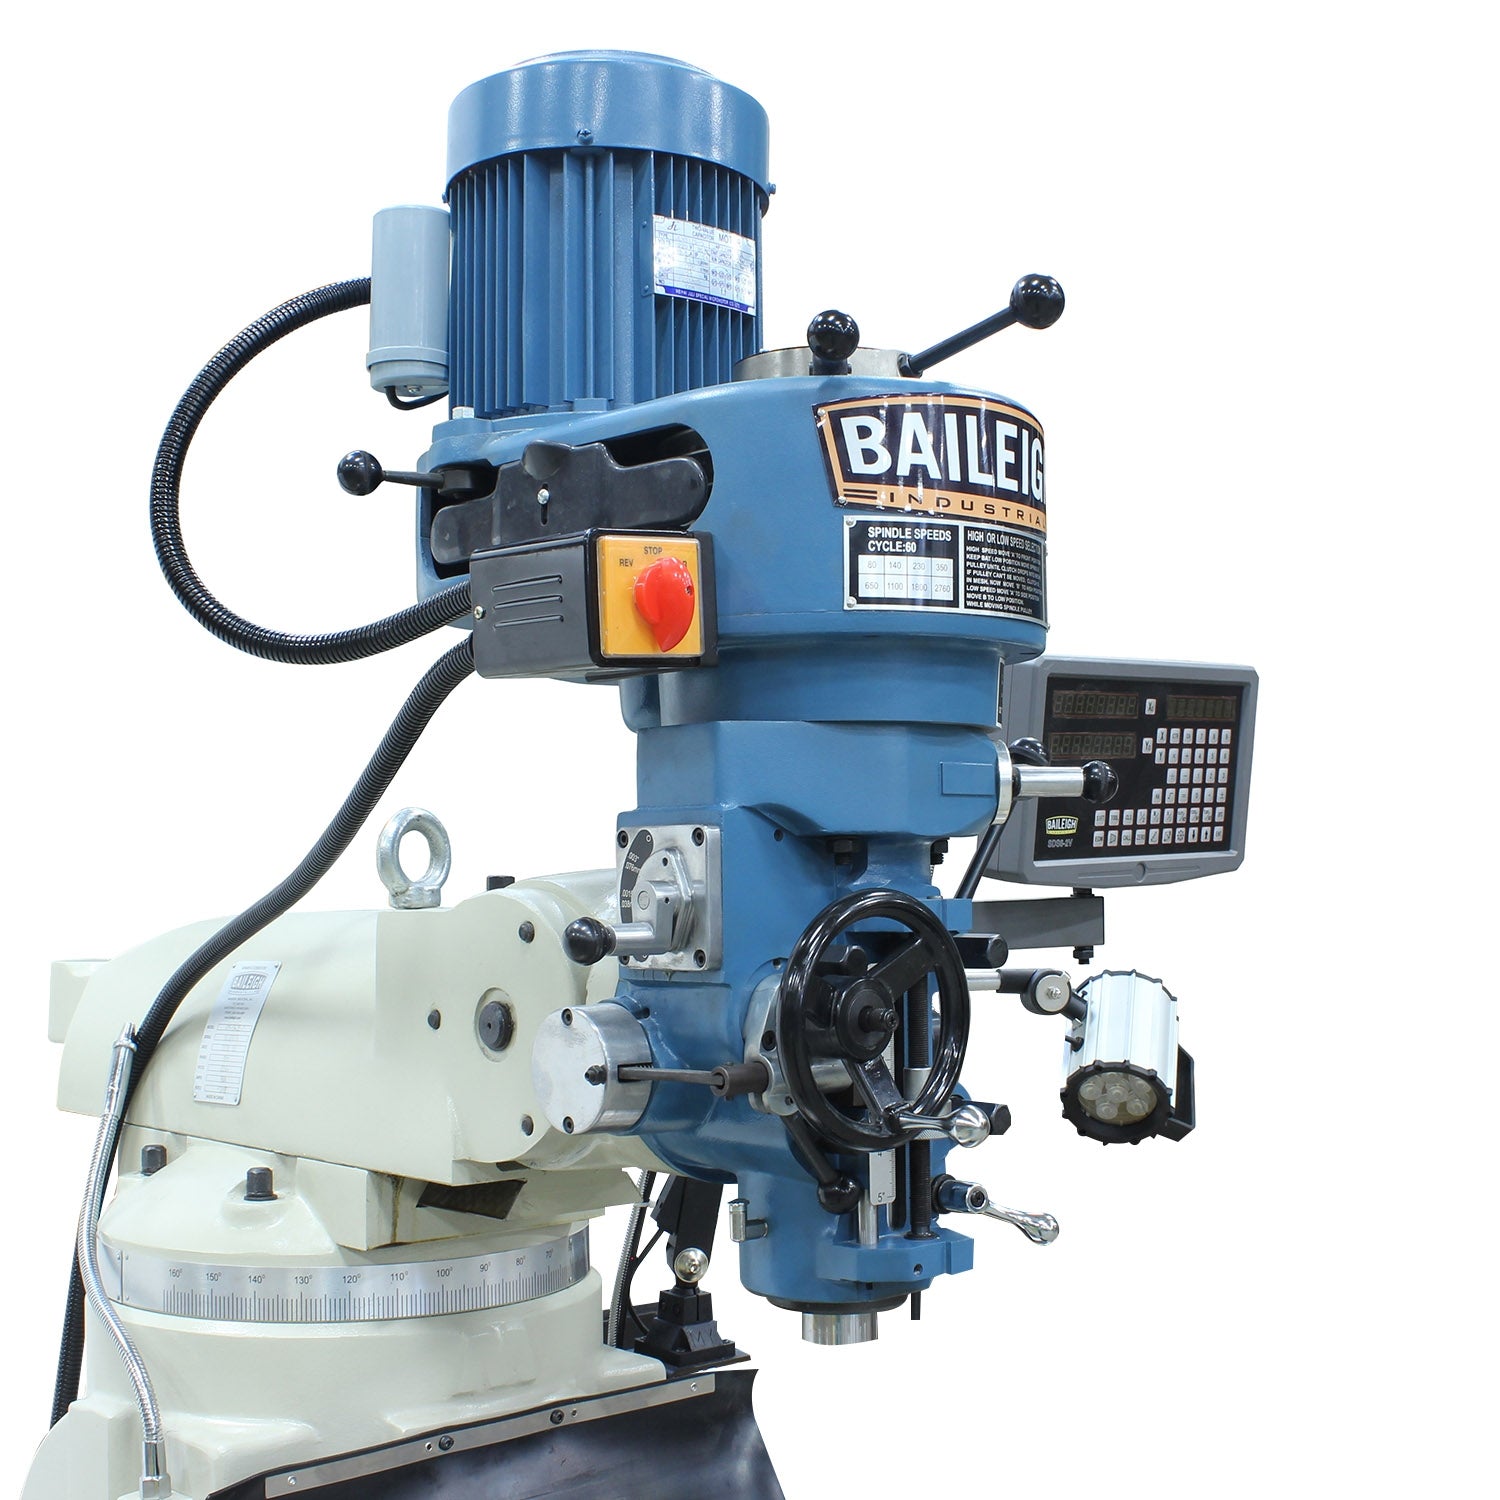 Baileigh VM-942E-1 220V 1 Phase 3HP Vertical Mill, 9" x 42" Table, 8 Speed, Includes R8 Spindle, Coolant, Work Light, X&Y DRO